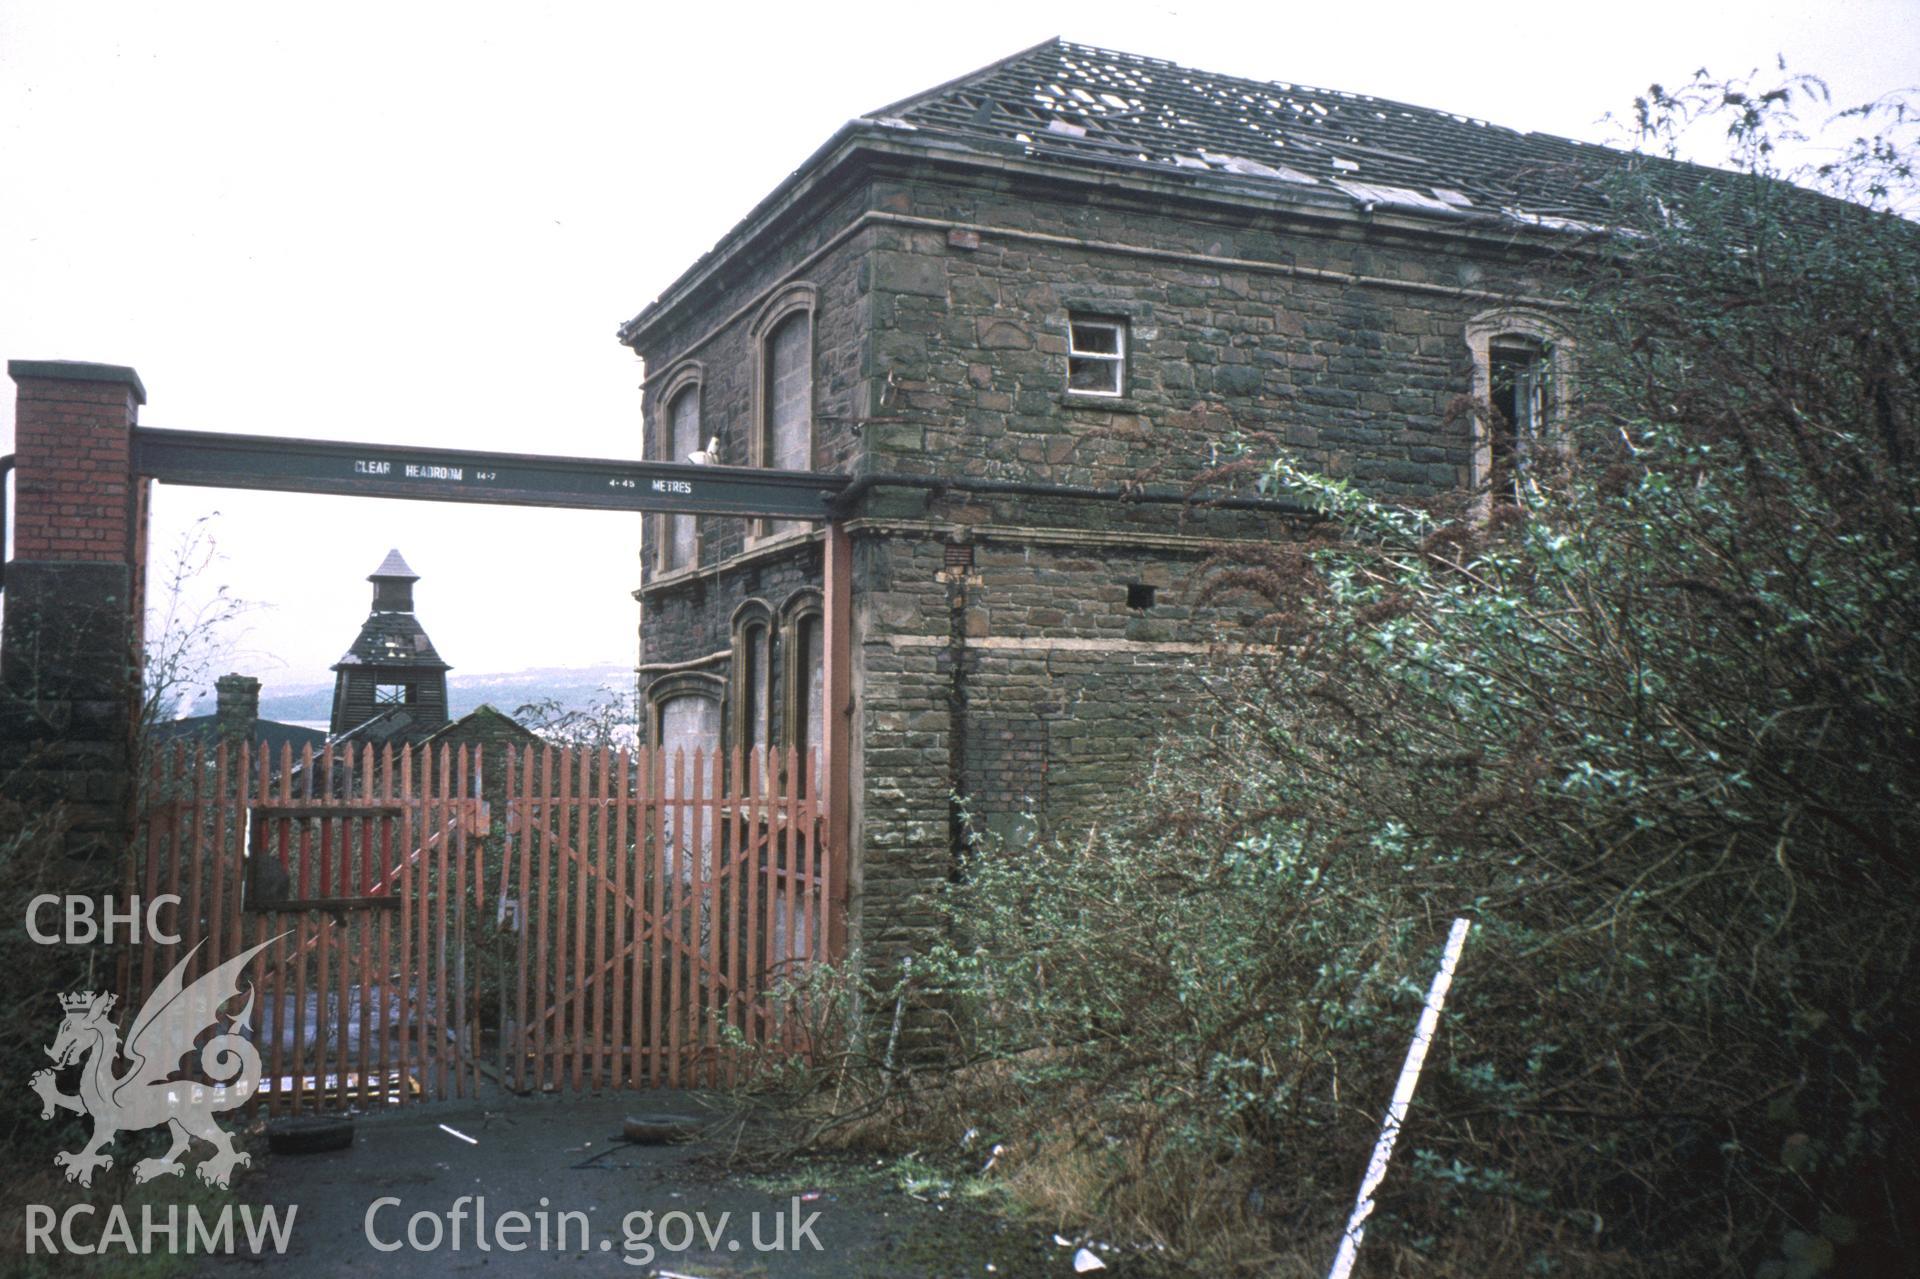 Colour slide of Hafod Copperworks, Swansea: showing the works wall, copper-slag coping, and south arch.